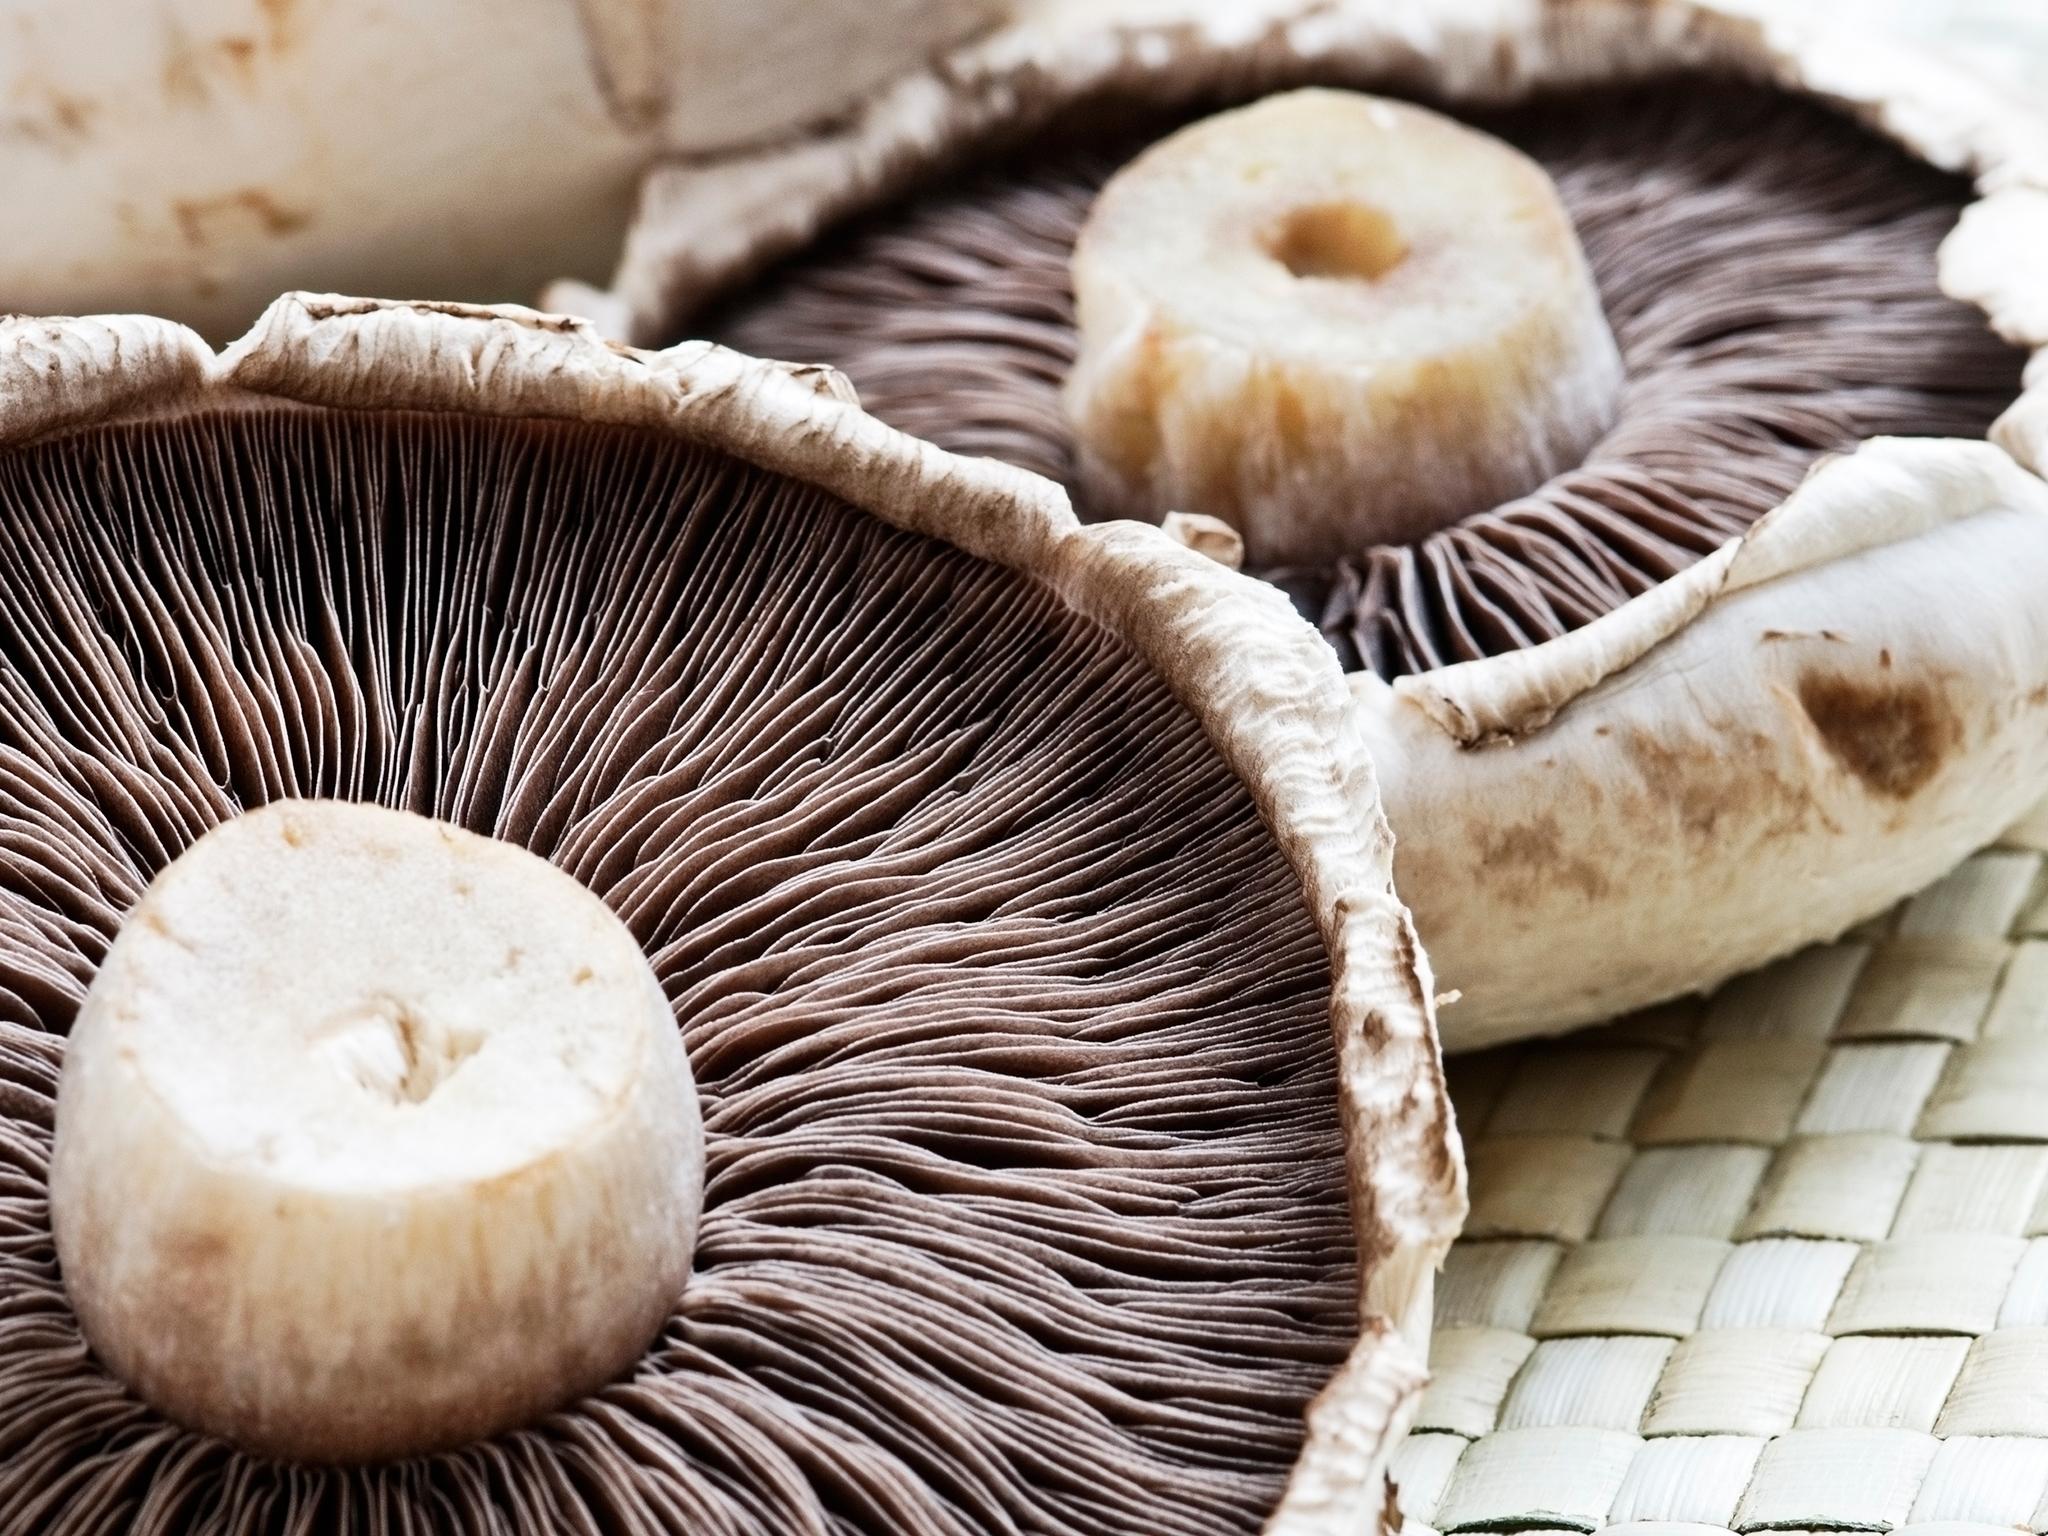 Mushroom coffee: Why people are hailing new fungus drink as next ...